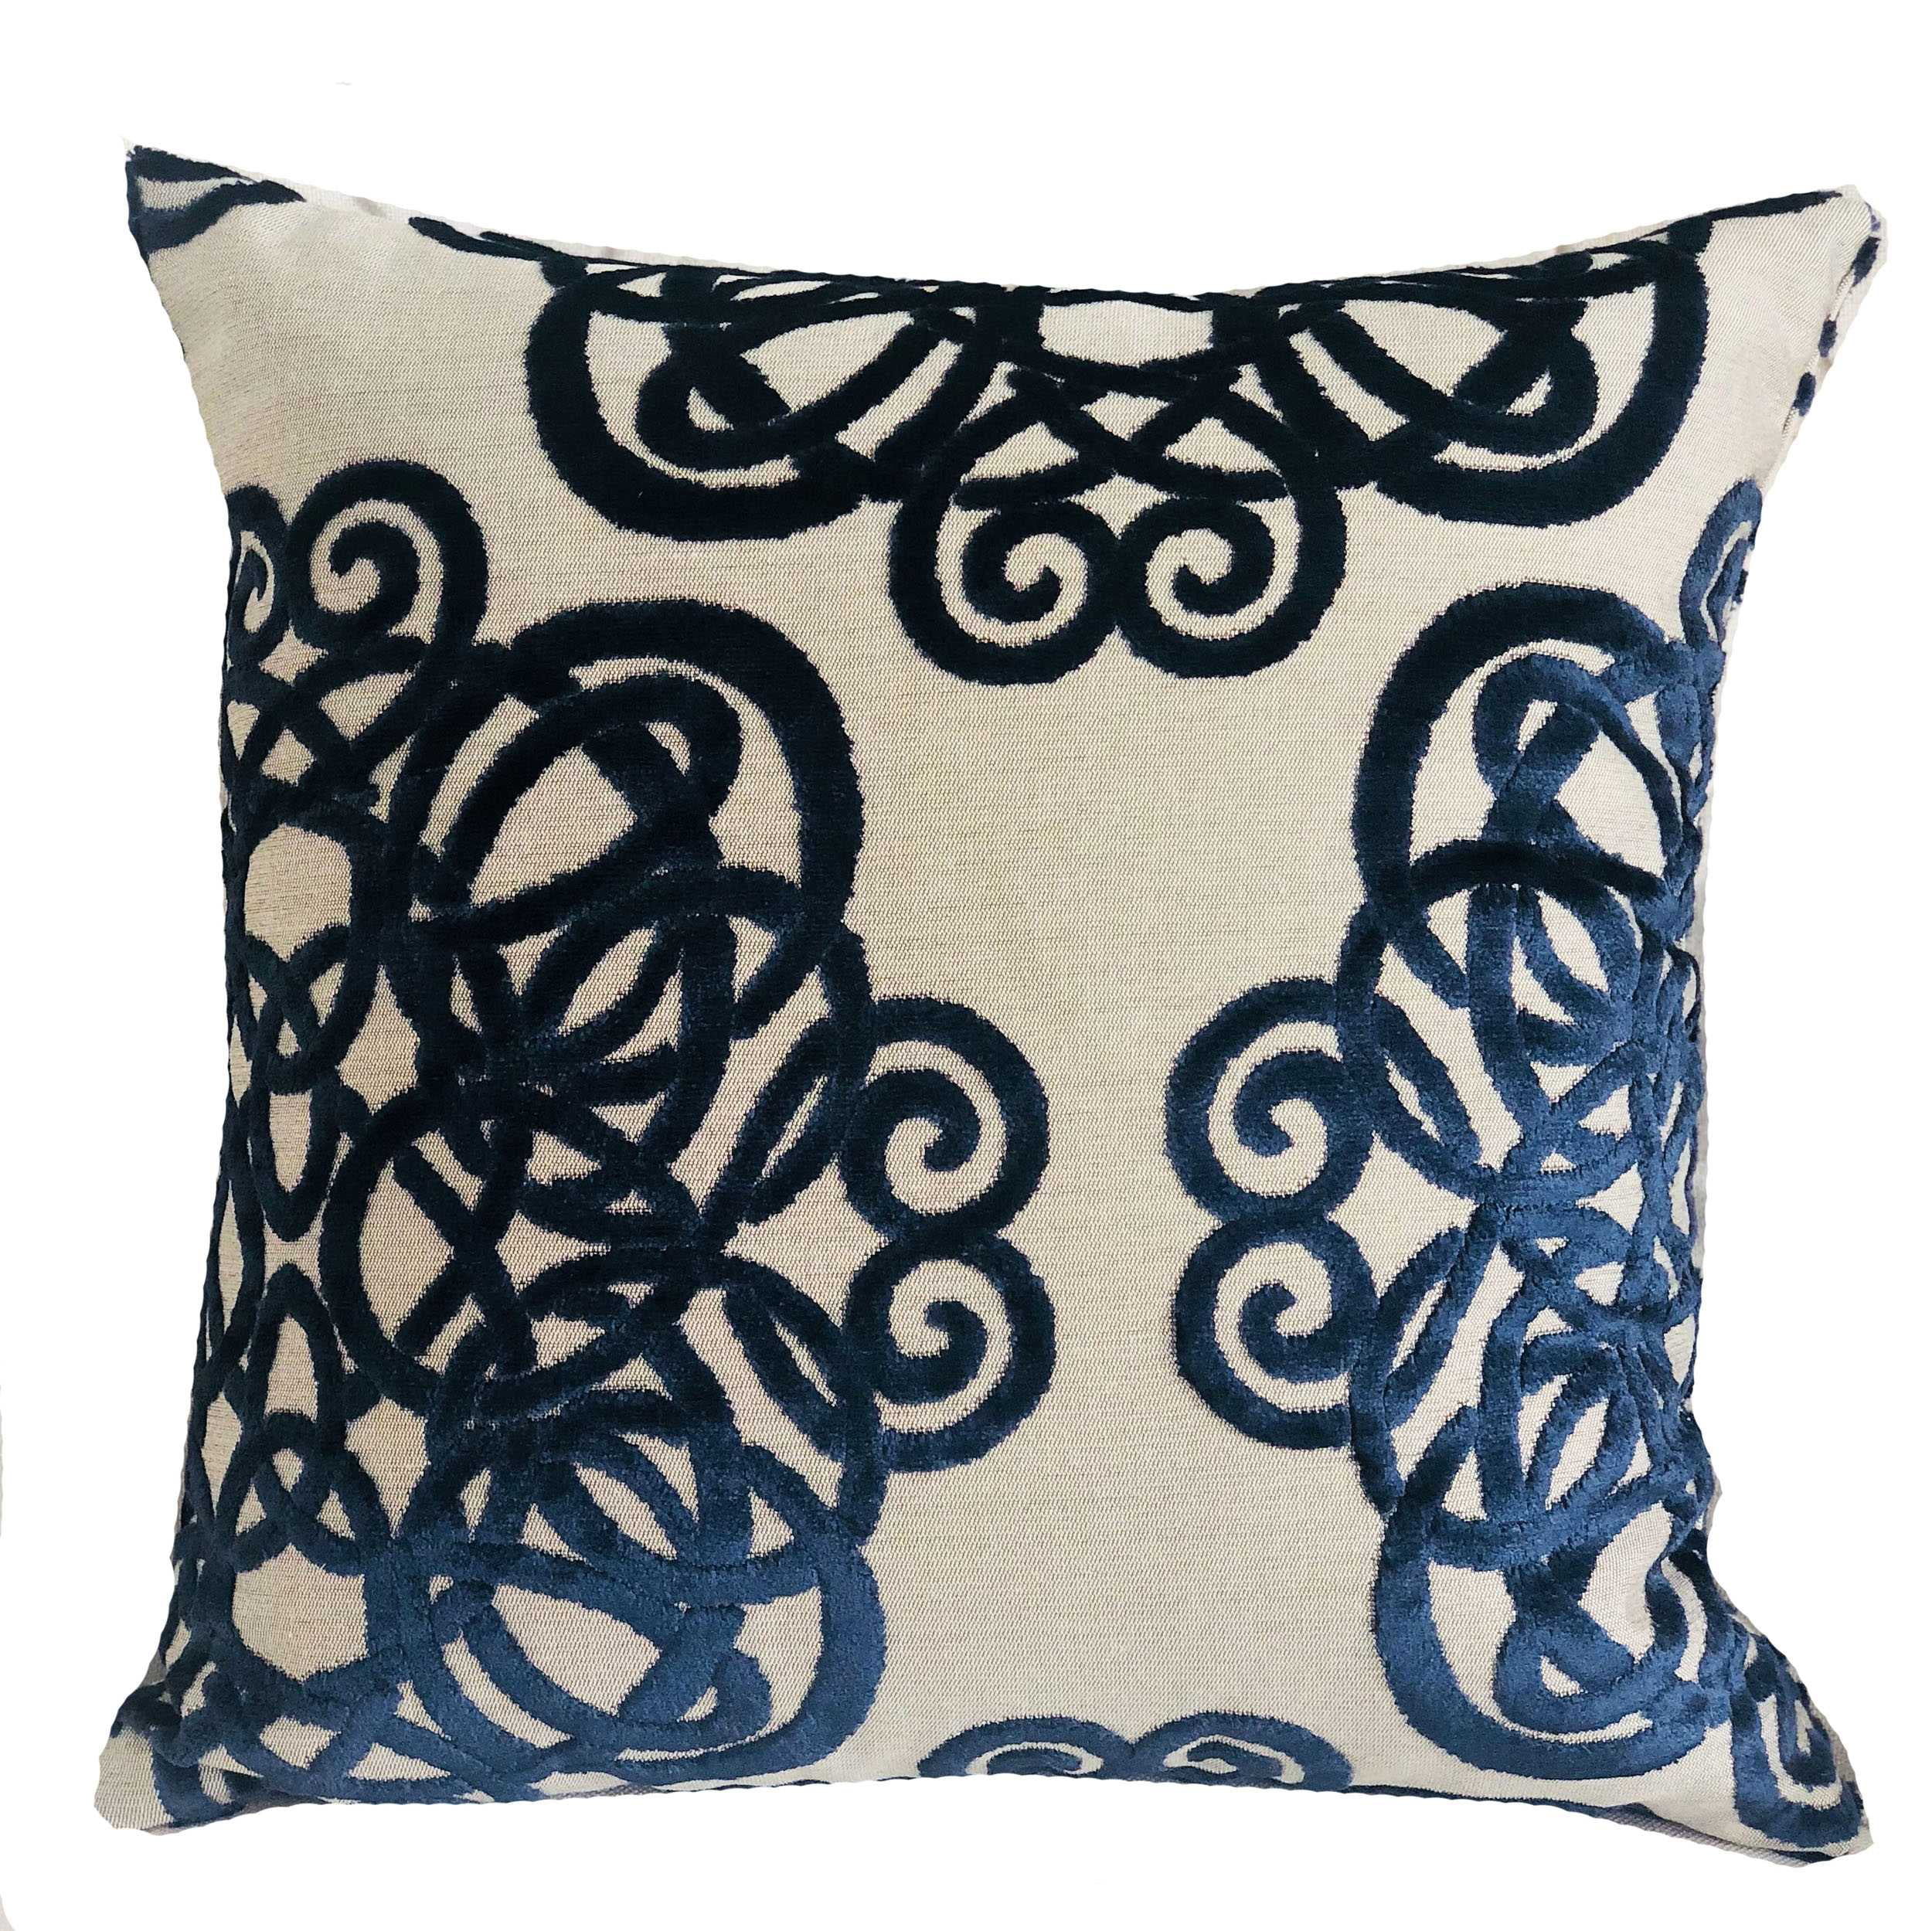 Navy and Taupe Handmade Luxury Pillow 22in x 22in - Walmart.com ...